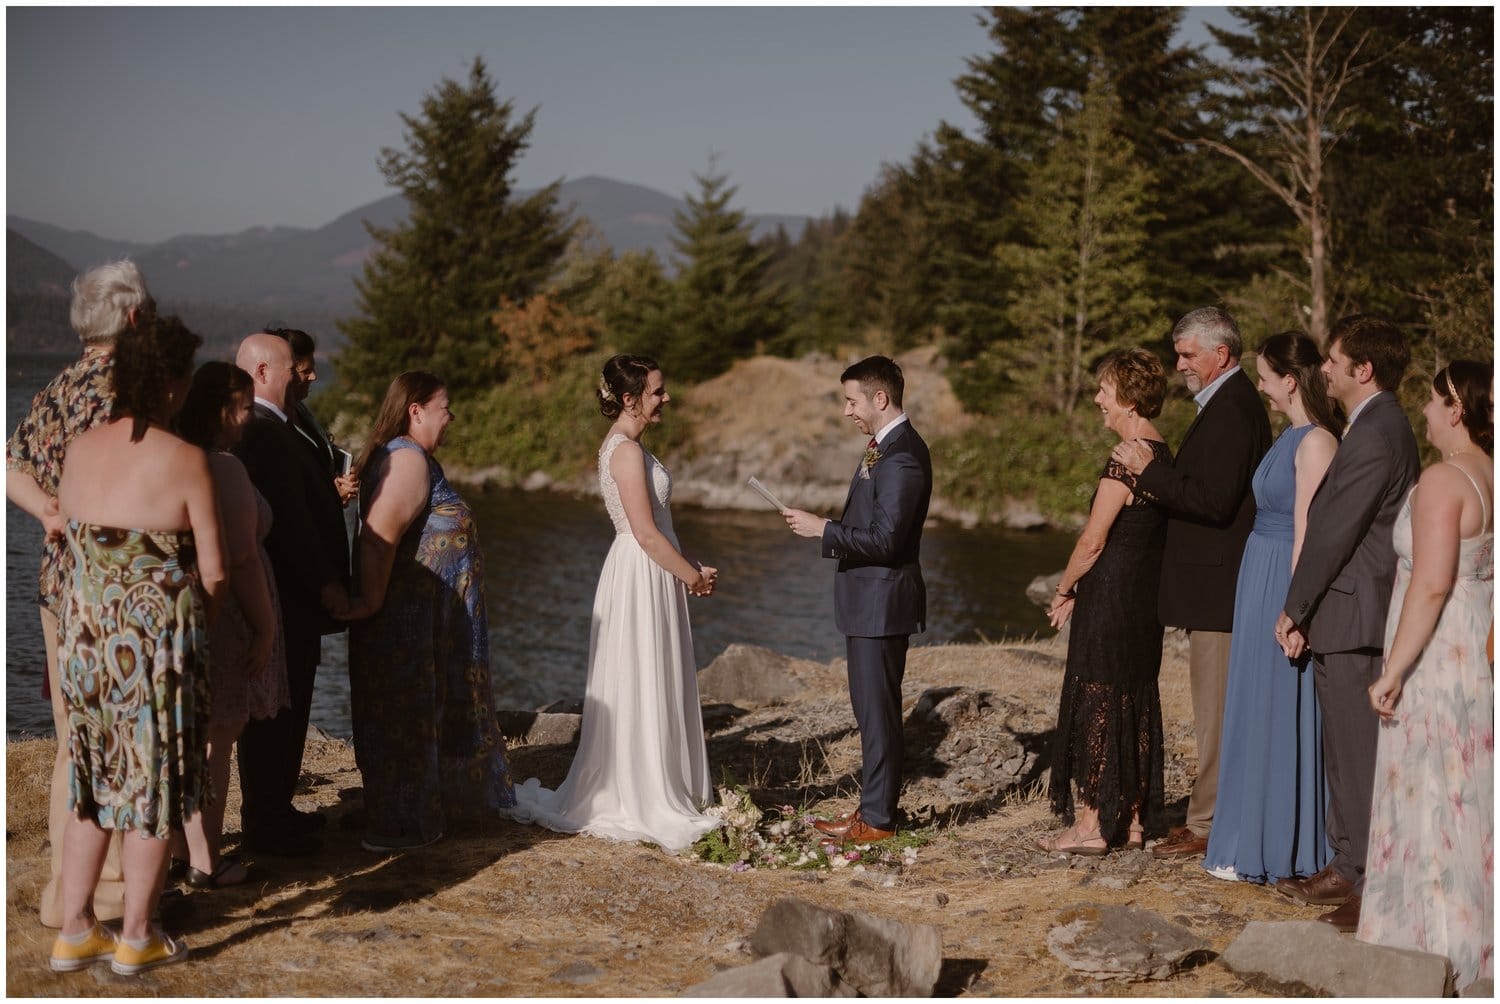 Groom reads his vows to the bride during their intimate elopement ceremony at the Columbia River Gorge in Oregon. They are surrounded by friends and family. 